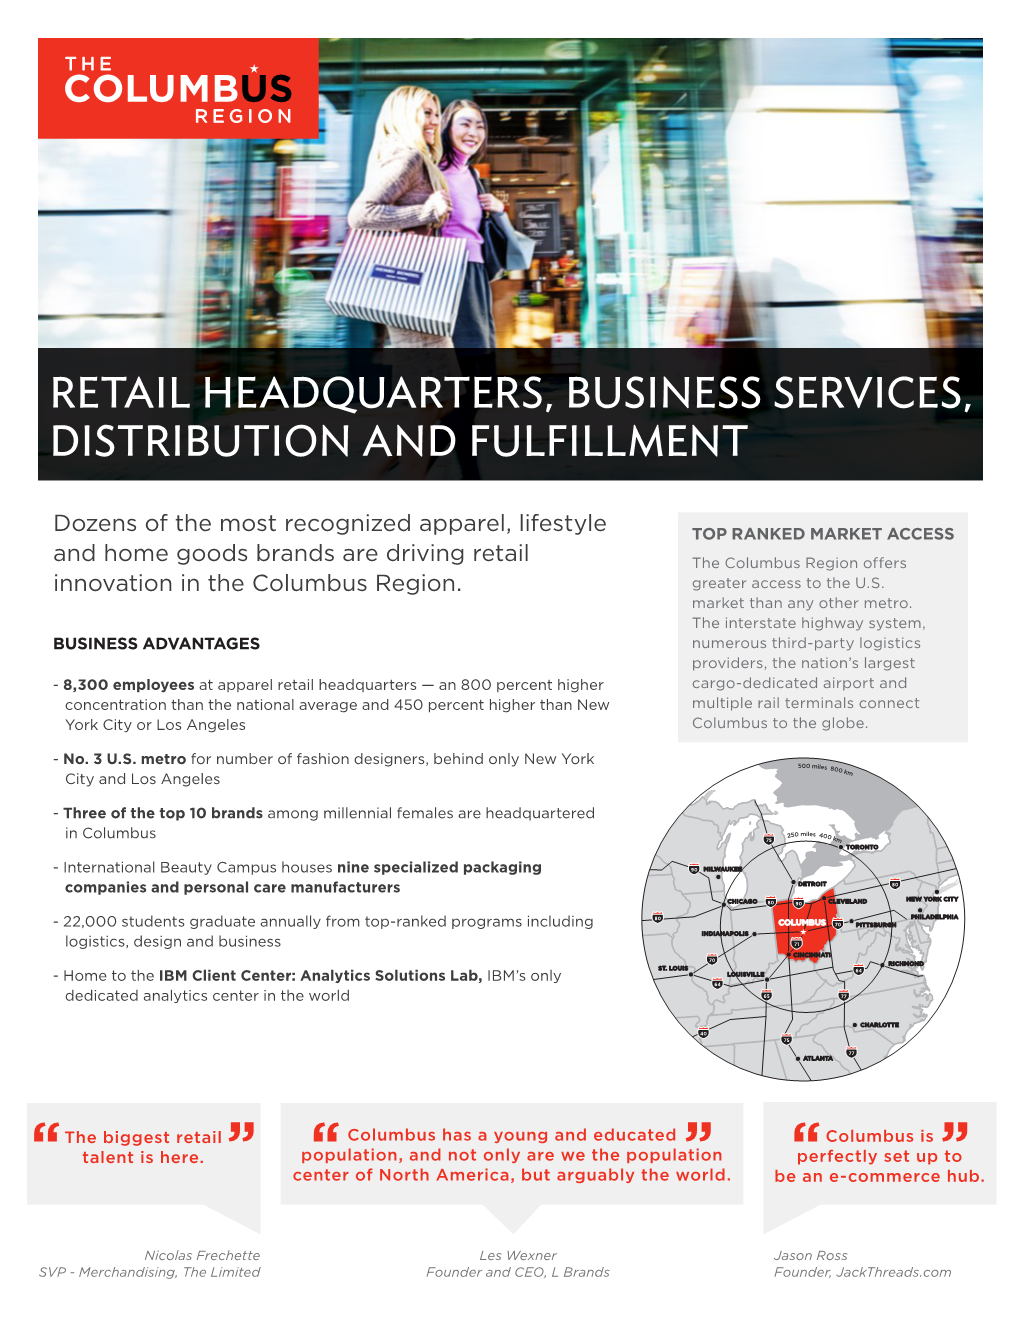 Retail Headquarters, Business Services, Distribution and Fulfillment